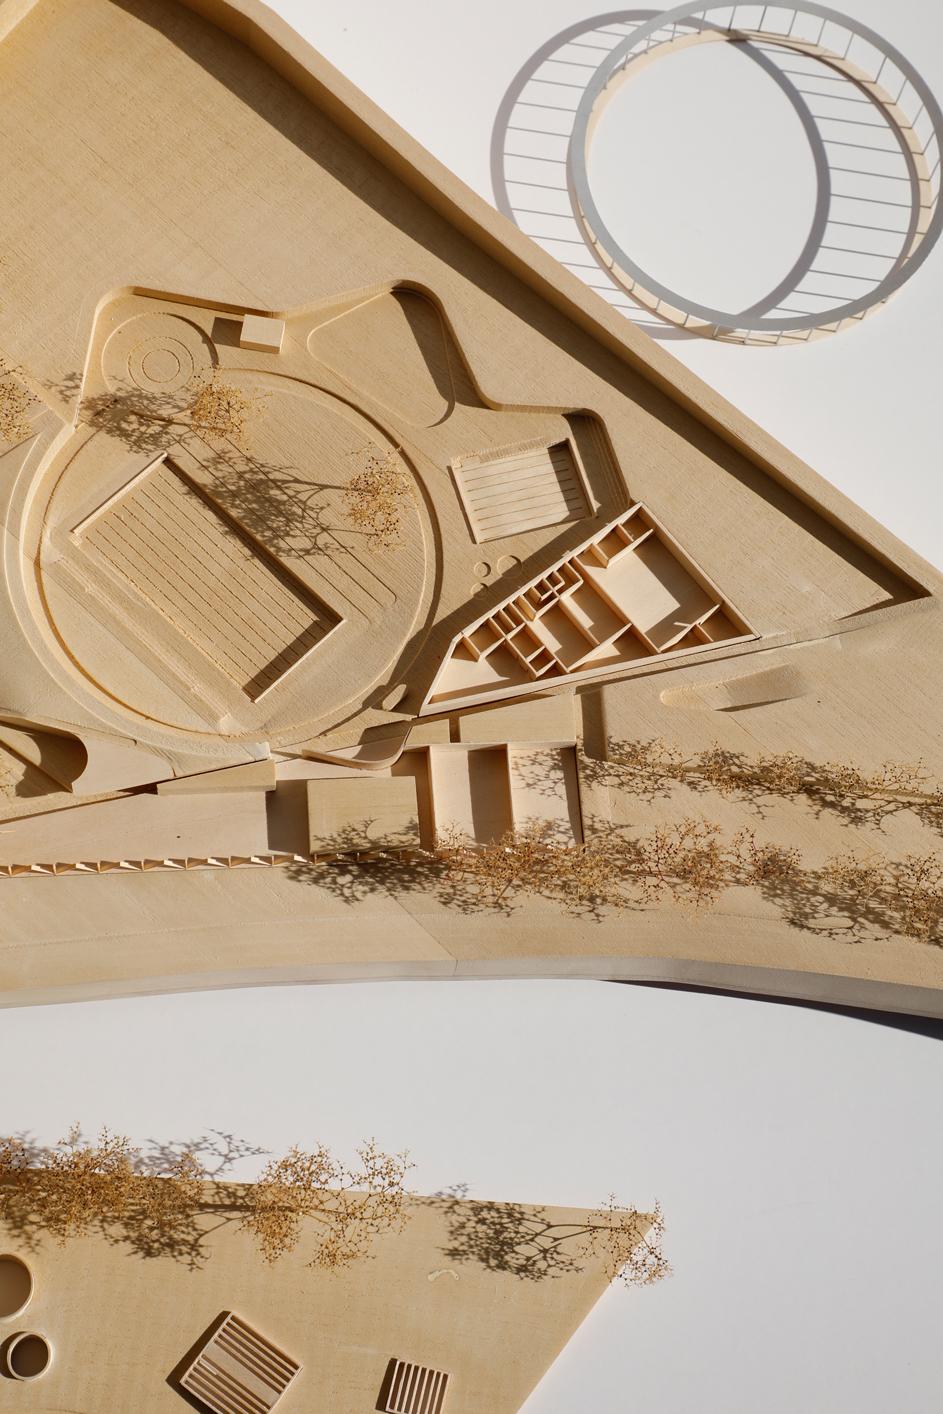 Architectural Compeition Model at 1:500 for the Parramatta Pool Competion by Grimshaw and Andrew Burges